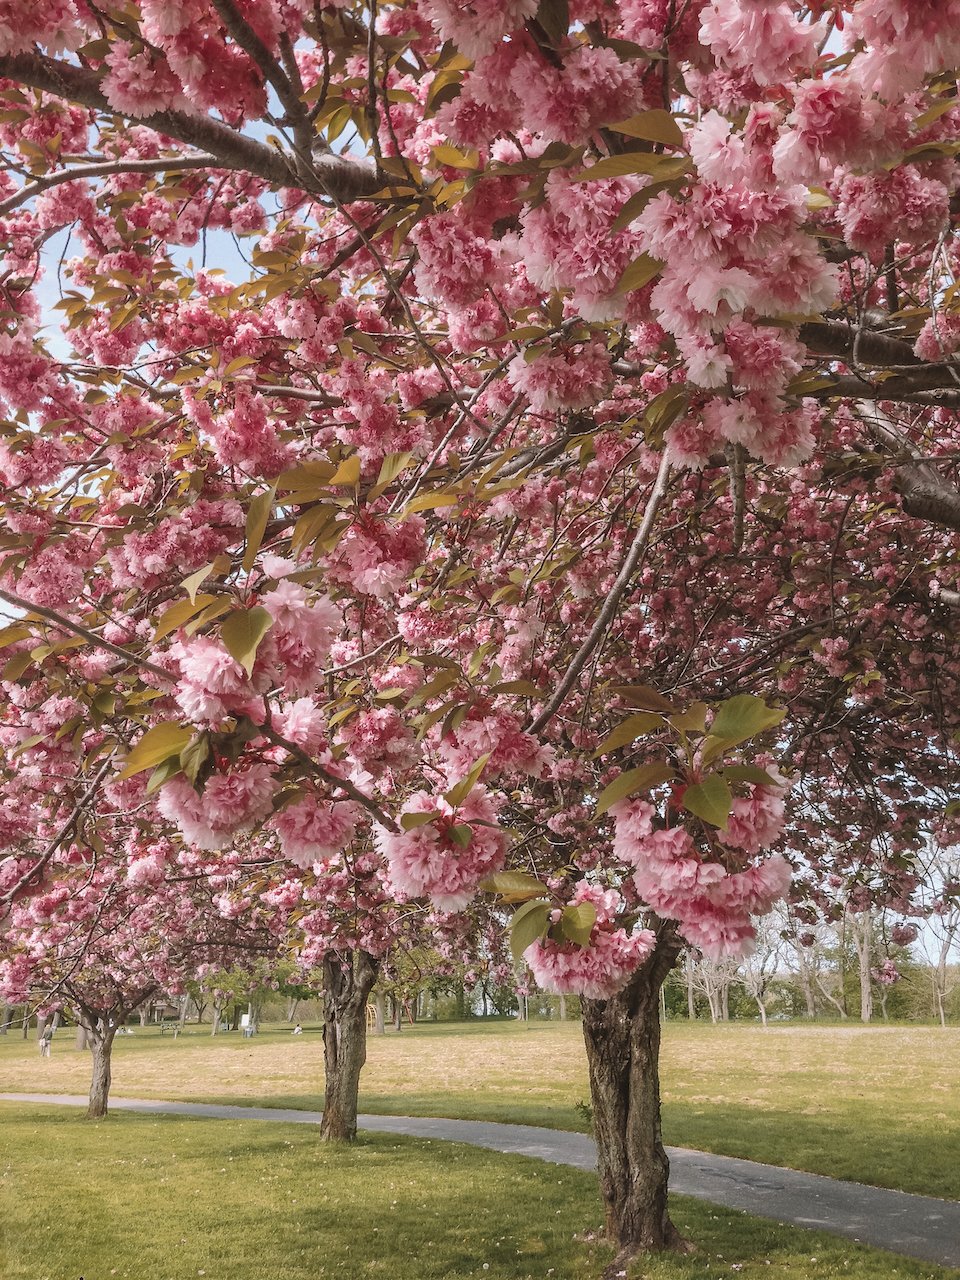 Cherry blossoms in full bloom at McFarlane Park - Niagara-On-The-Lake - Ontario - Canada